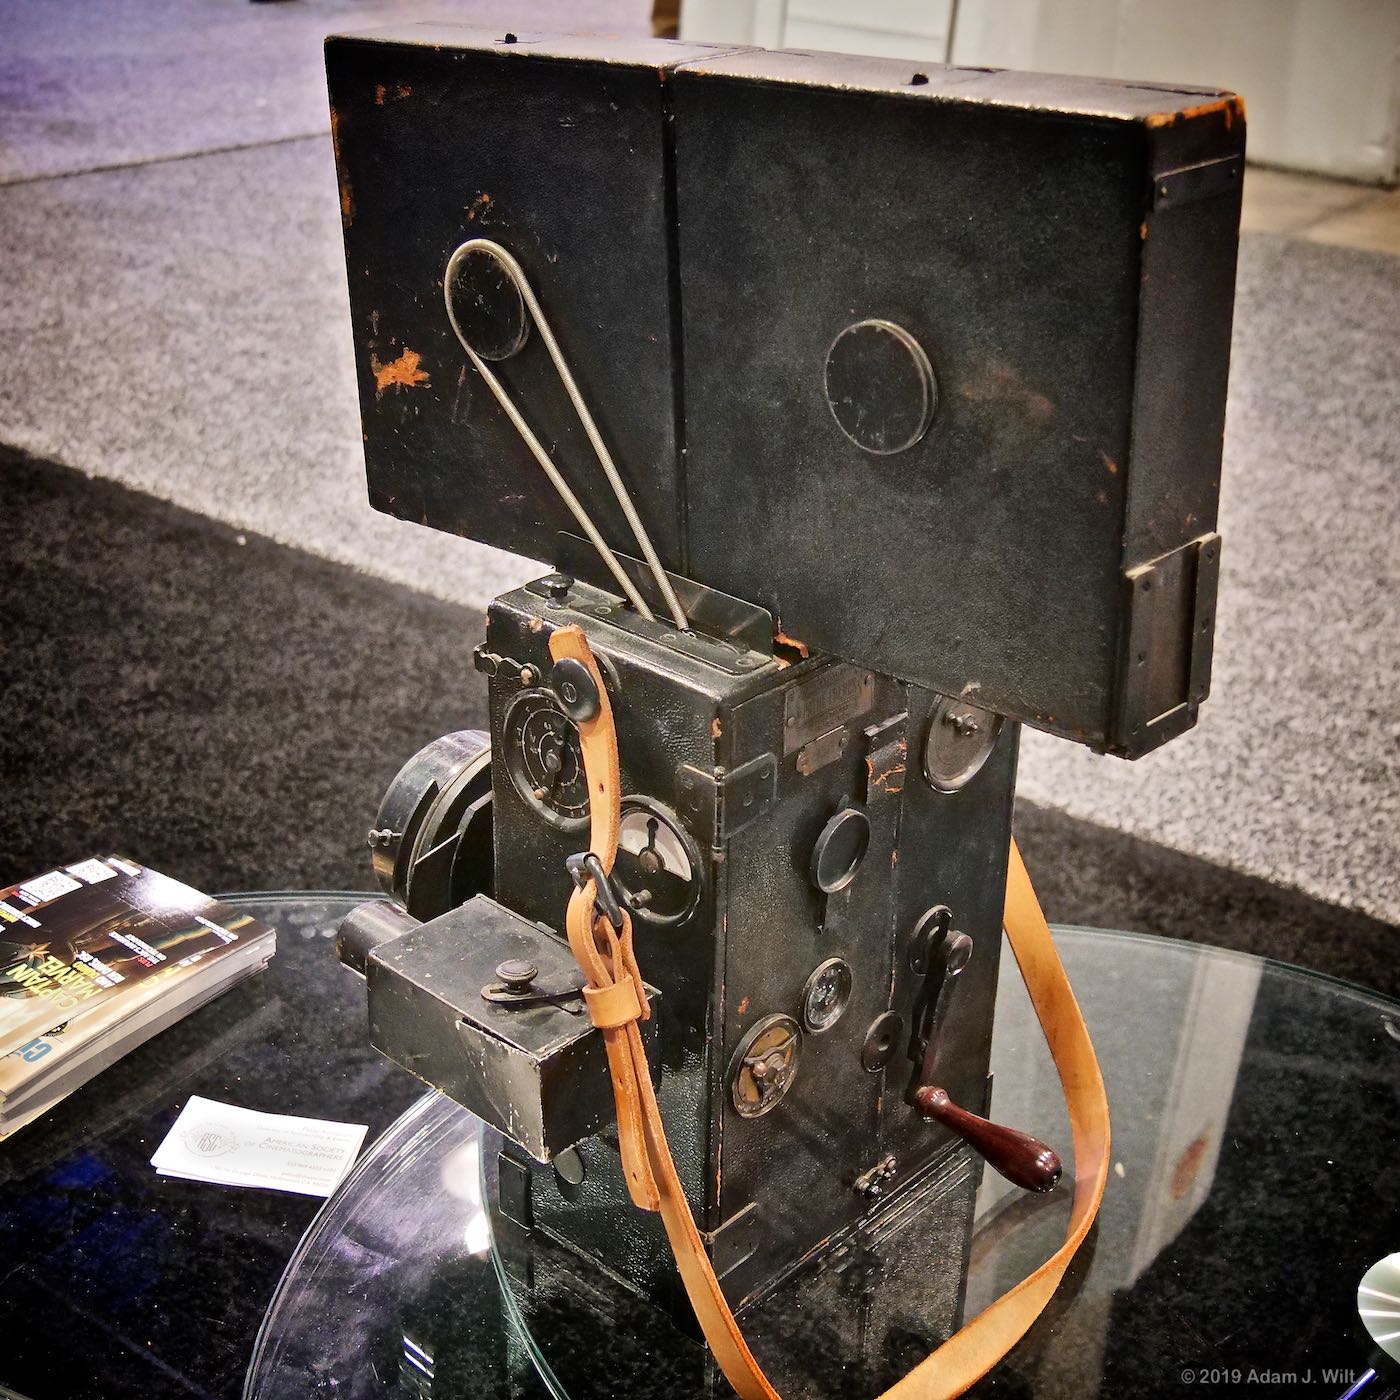 This Pathé Brothers camera at the ASC booth is about 100 years old